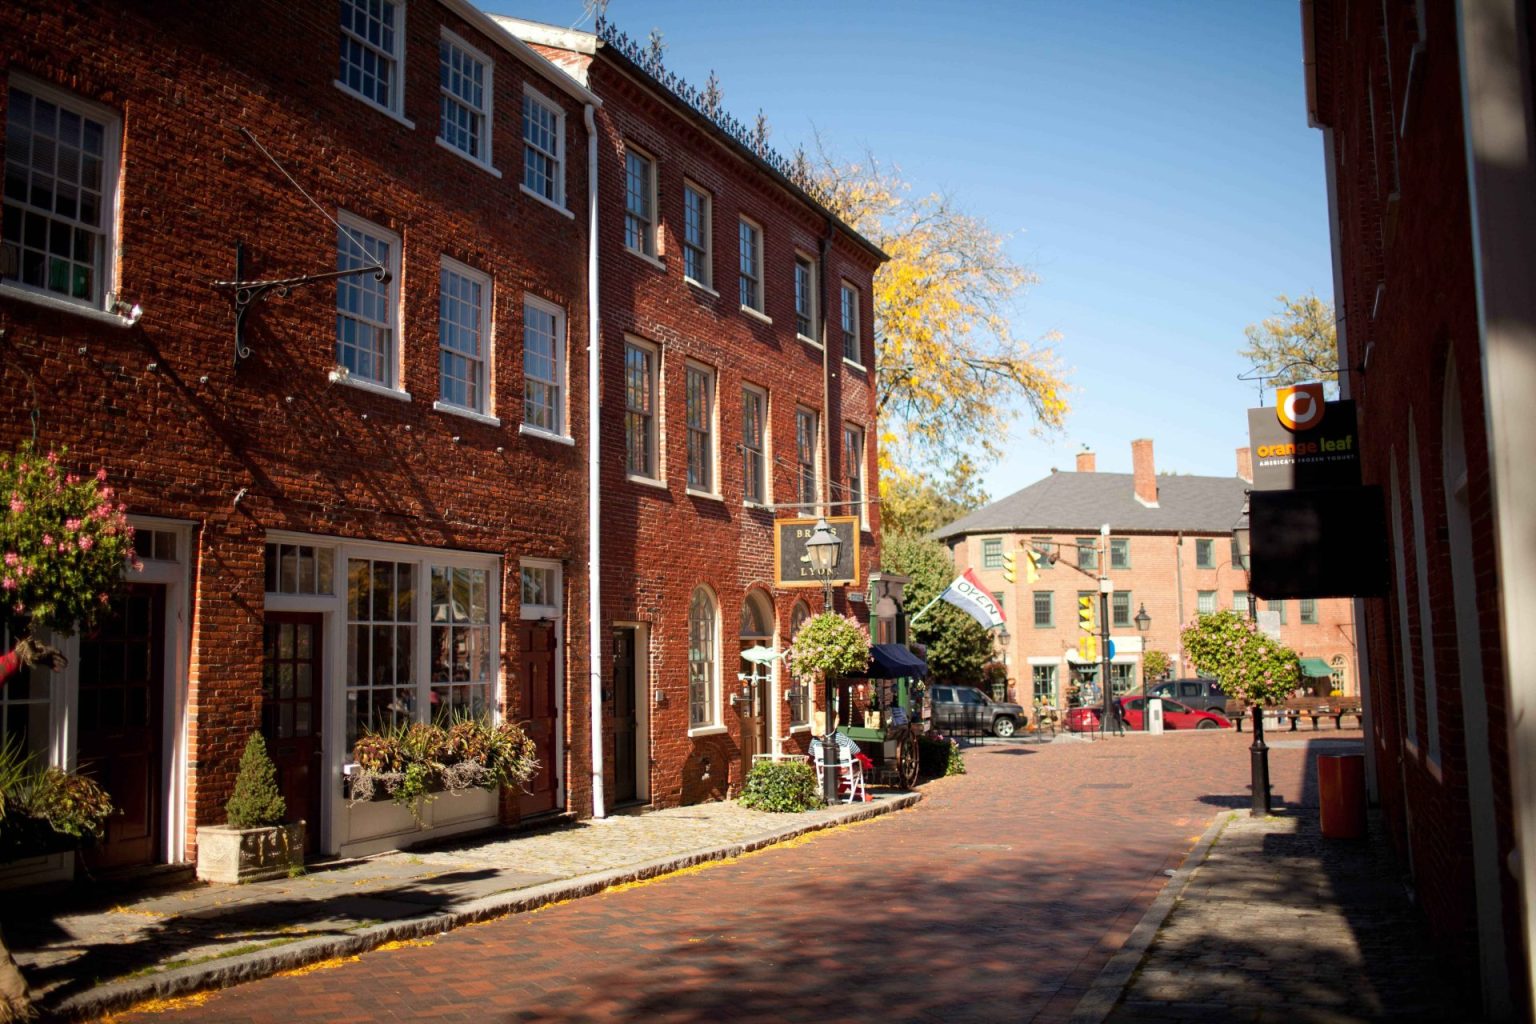 Downtown Newburyport. Colonial style brick buildings with brick streets and flower windowboxes in the windows of the buildings